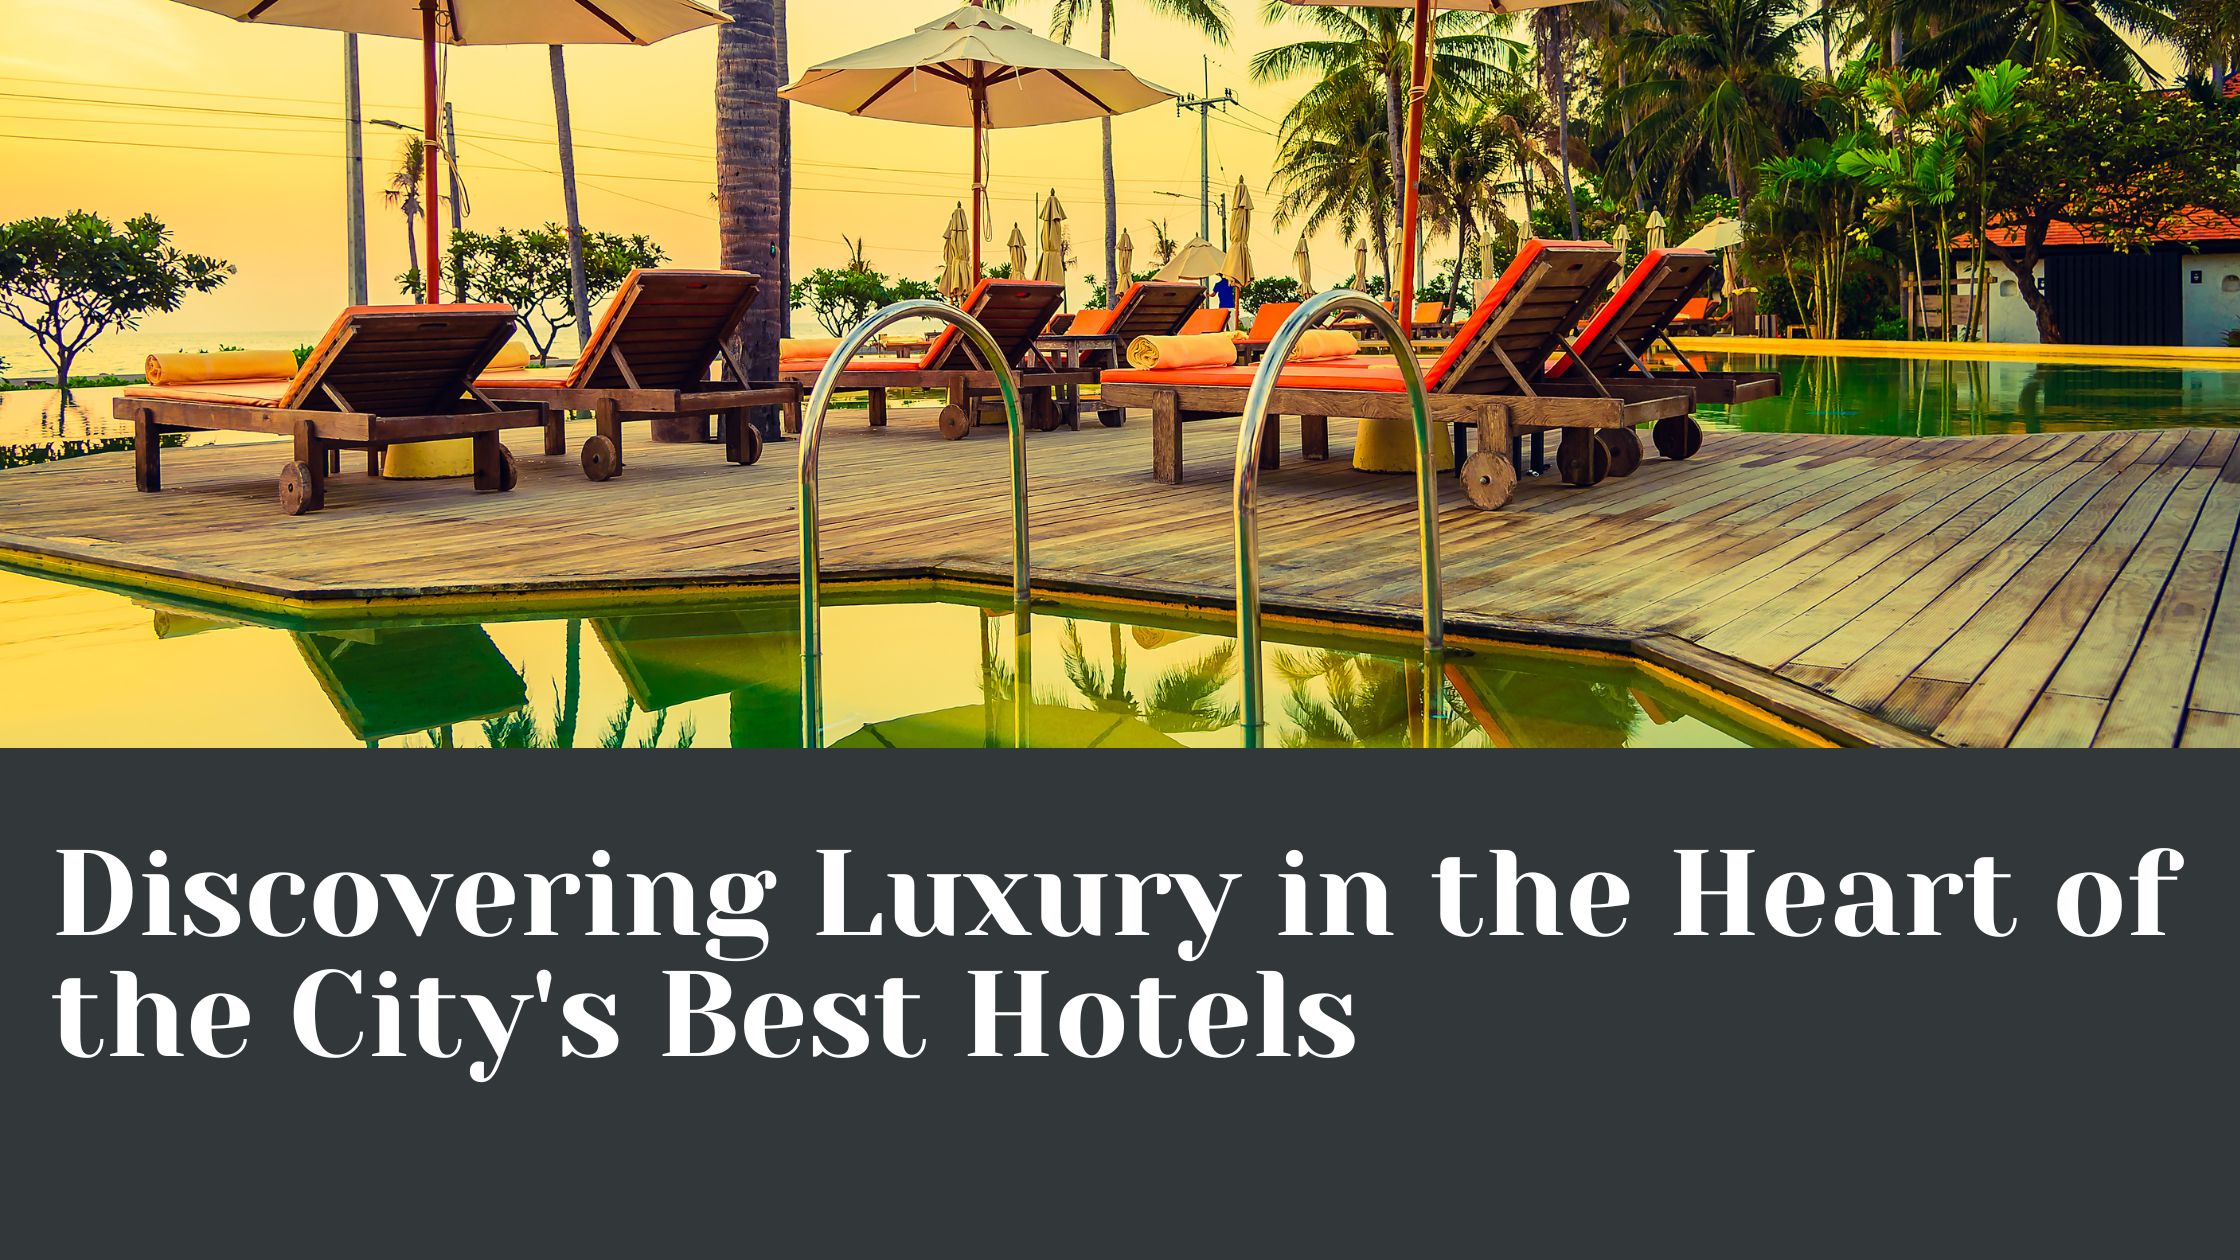 Discovering Luxury in the Heart of the City's Best Hotels